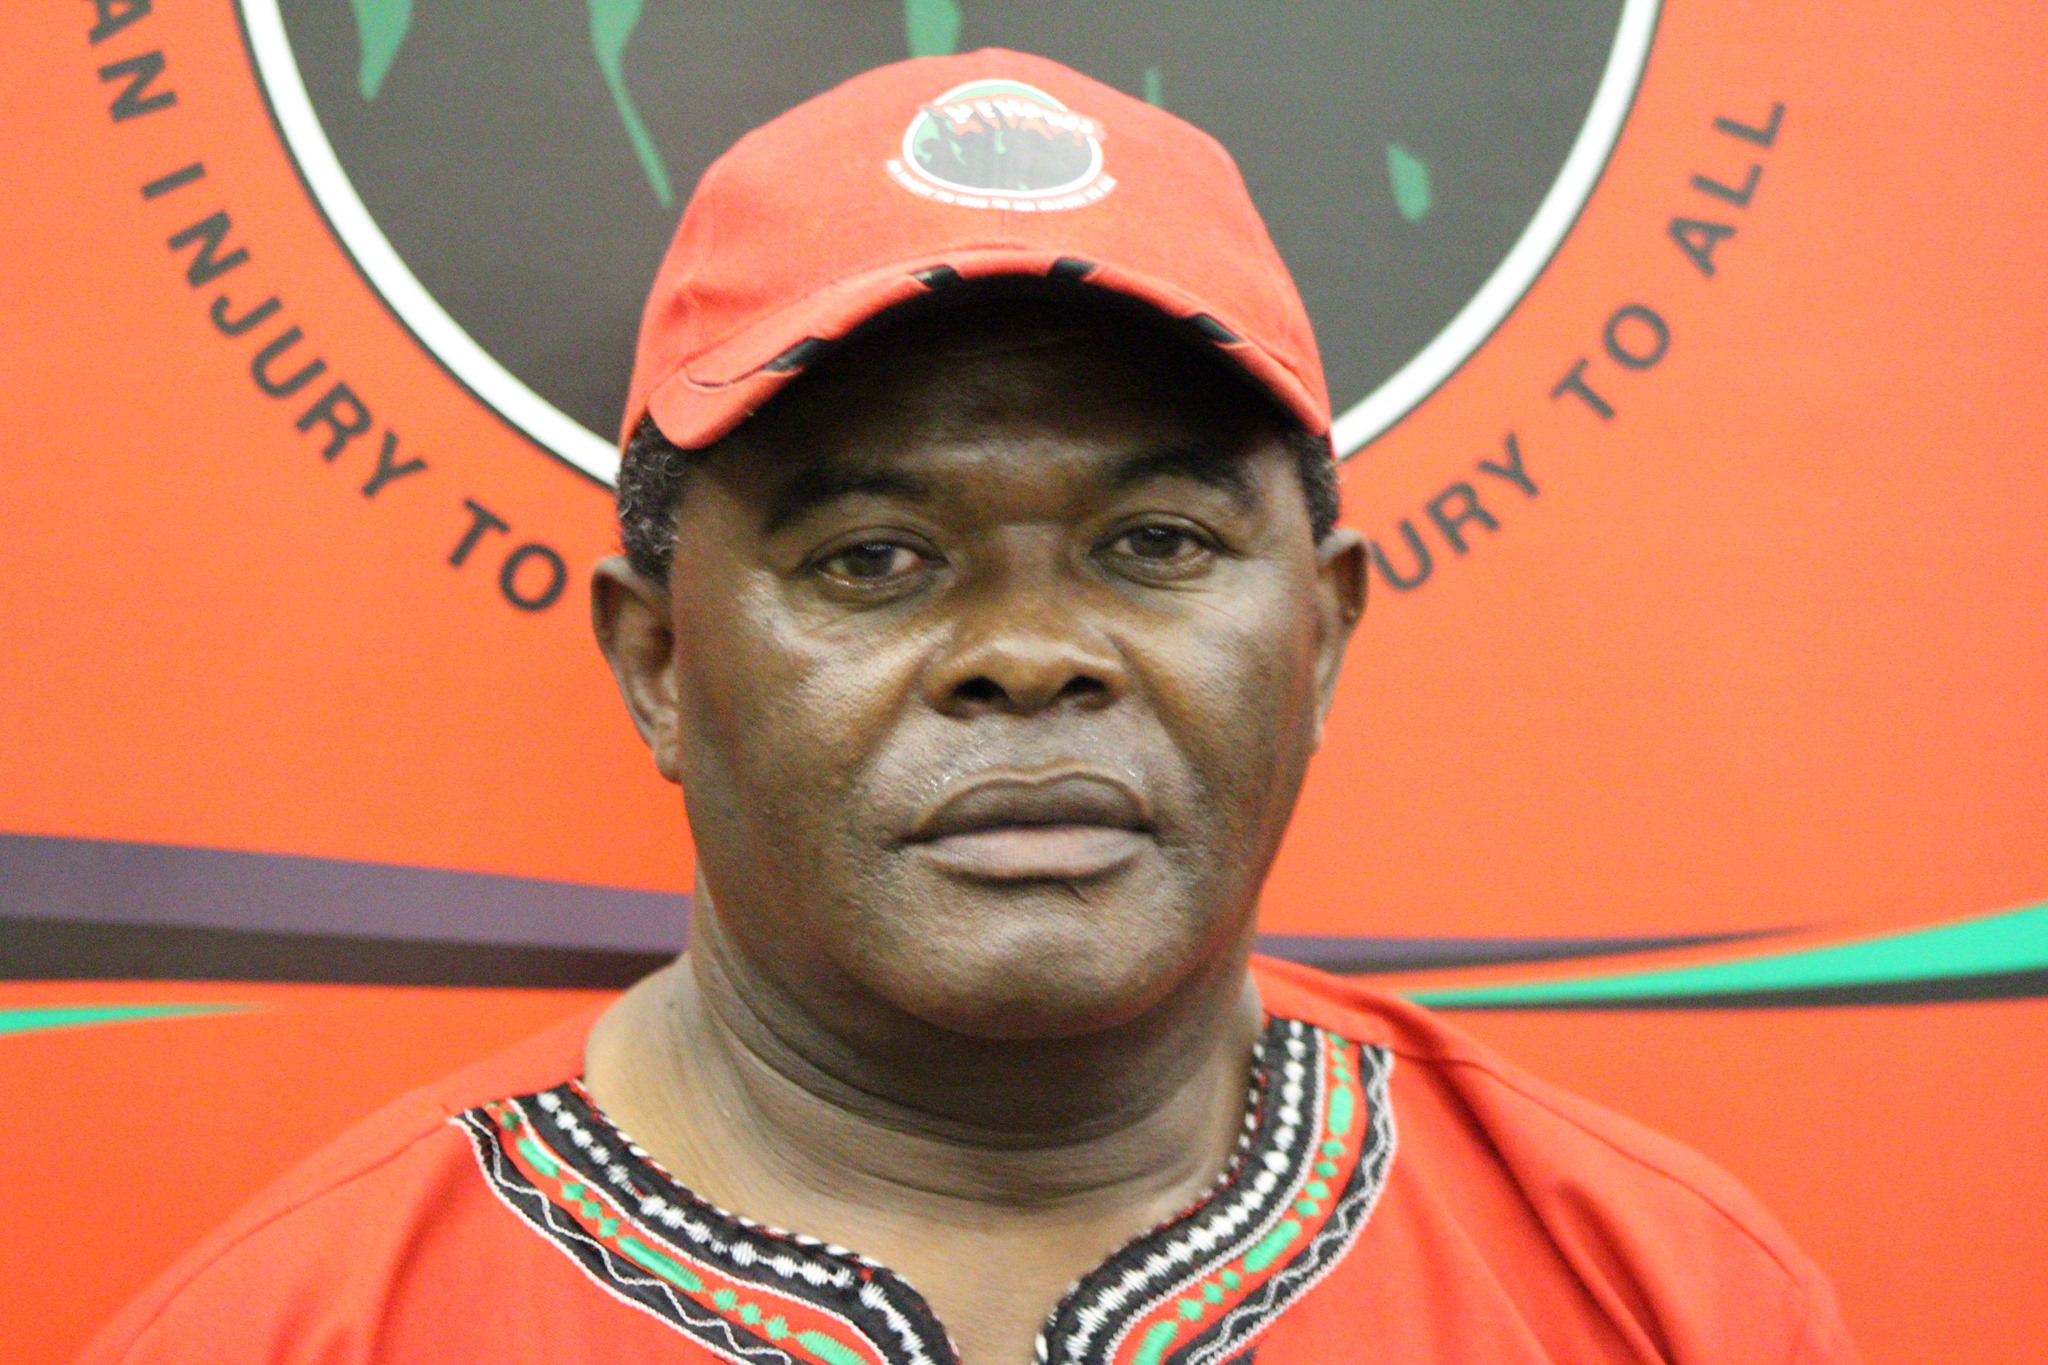  The Eastern Cape Provincial Chairperson Cde Lizo Vakala